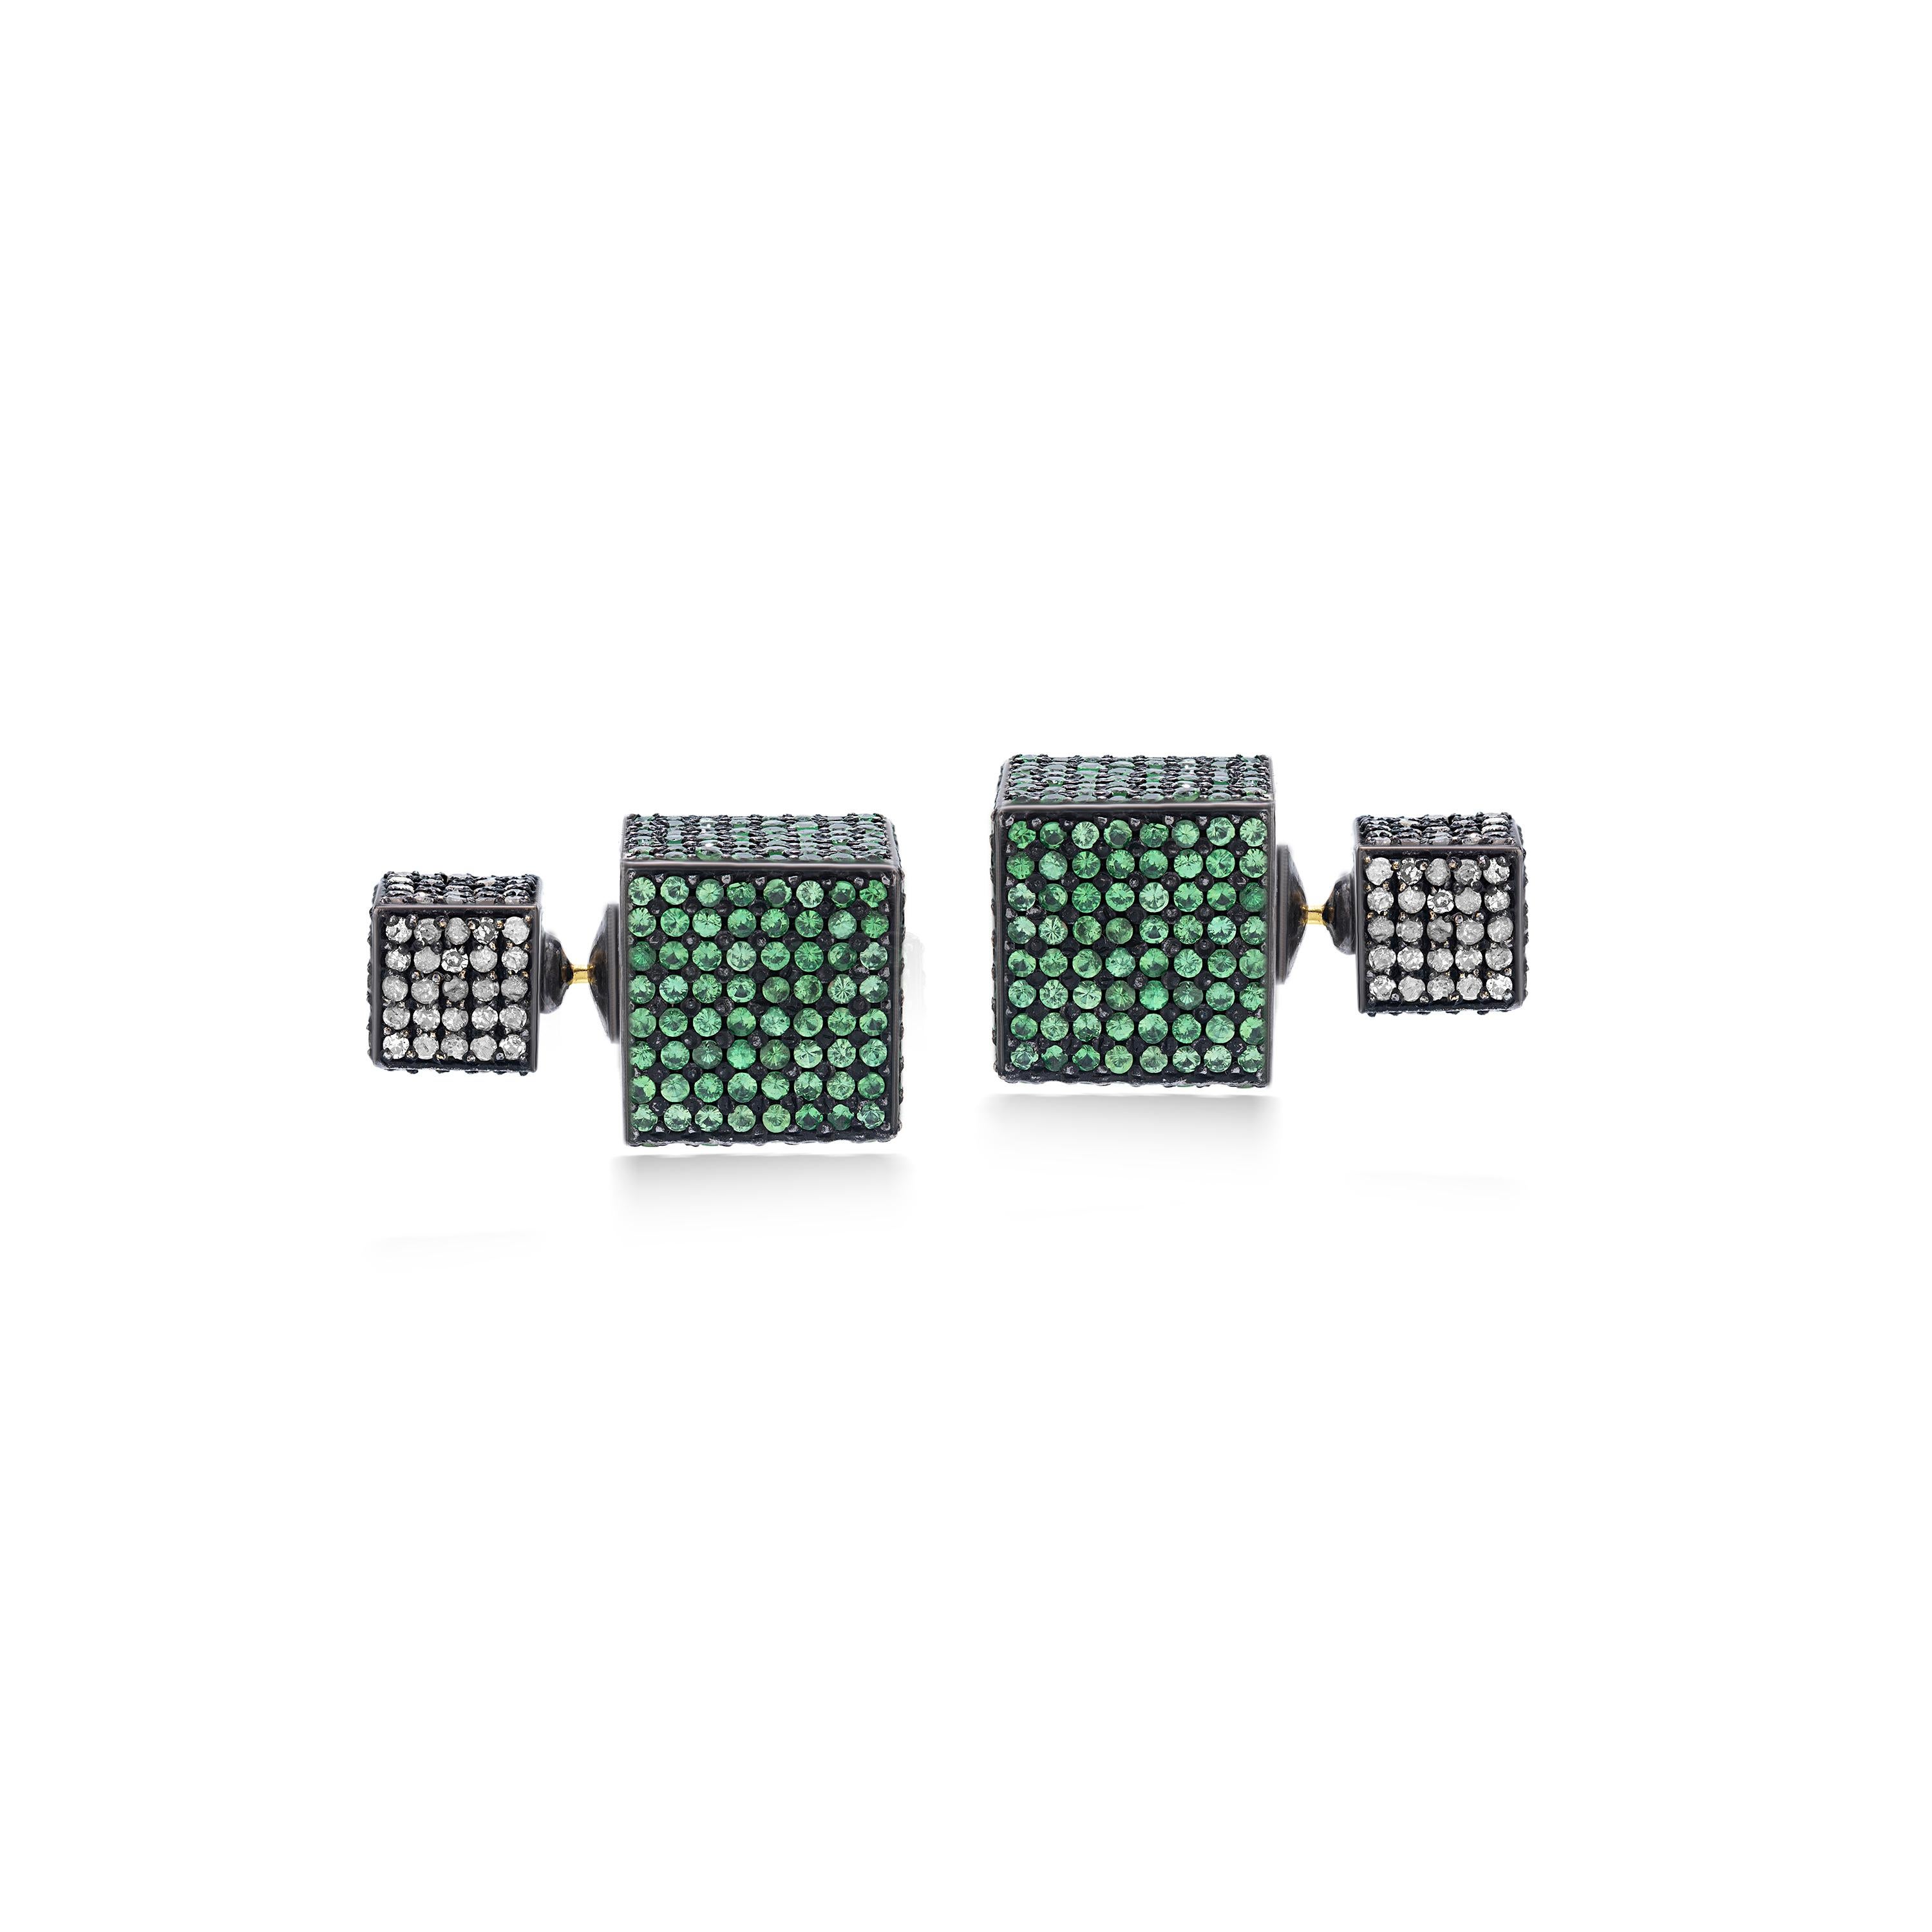 This Gemistry Victorian 10.55 Ct. T.W. Diamond and Tsavorite Cube Stud Earrings features Tsavorite cubes dangling form diamond studded surmount. Rendered in 18k gold and 925 silver this ageless classic is embellished with diamonds, weighing 2.37